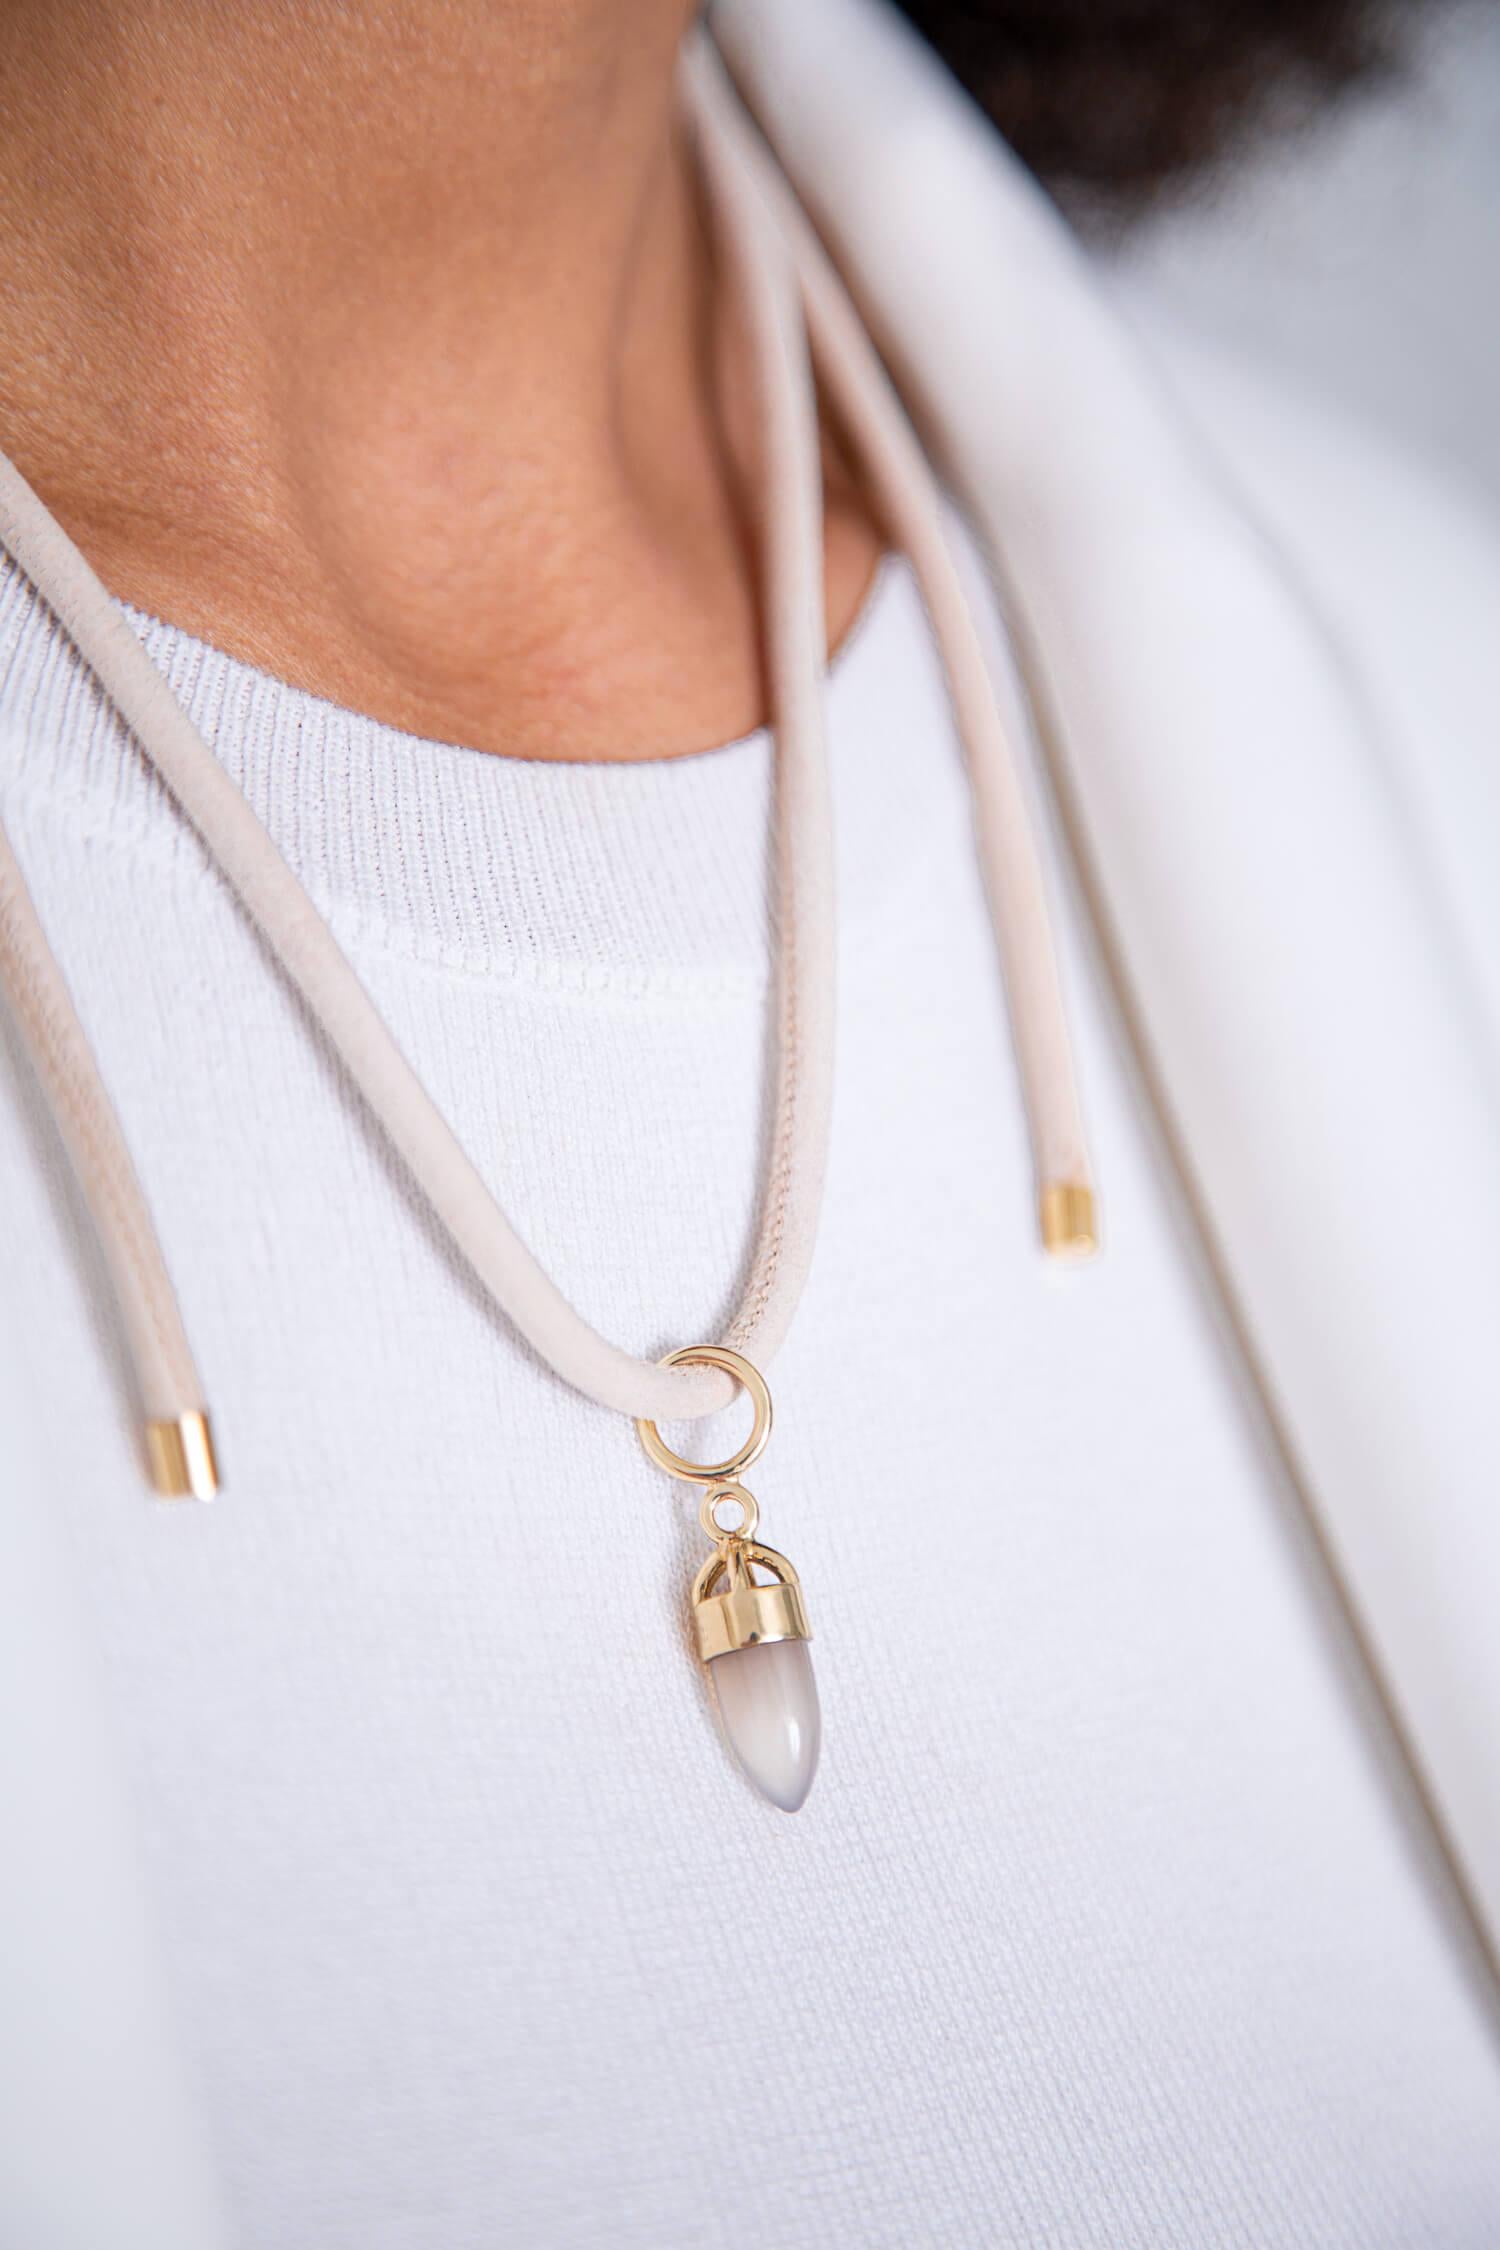 As seen in FT - How to Spend it!

Mallorca Flat
18kt yellow gold pendant, 8x15mm stone
These gorgeous pendants with bullet shaped smooth cut stones are designed to be versatile. Wear them alone, in multiples of three, with a chain, or with a cord,